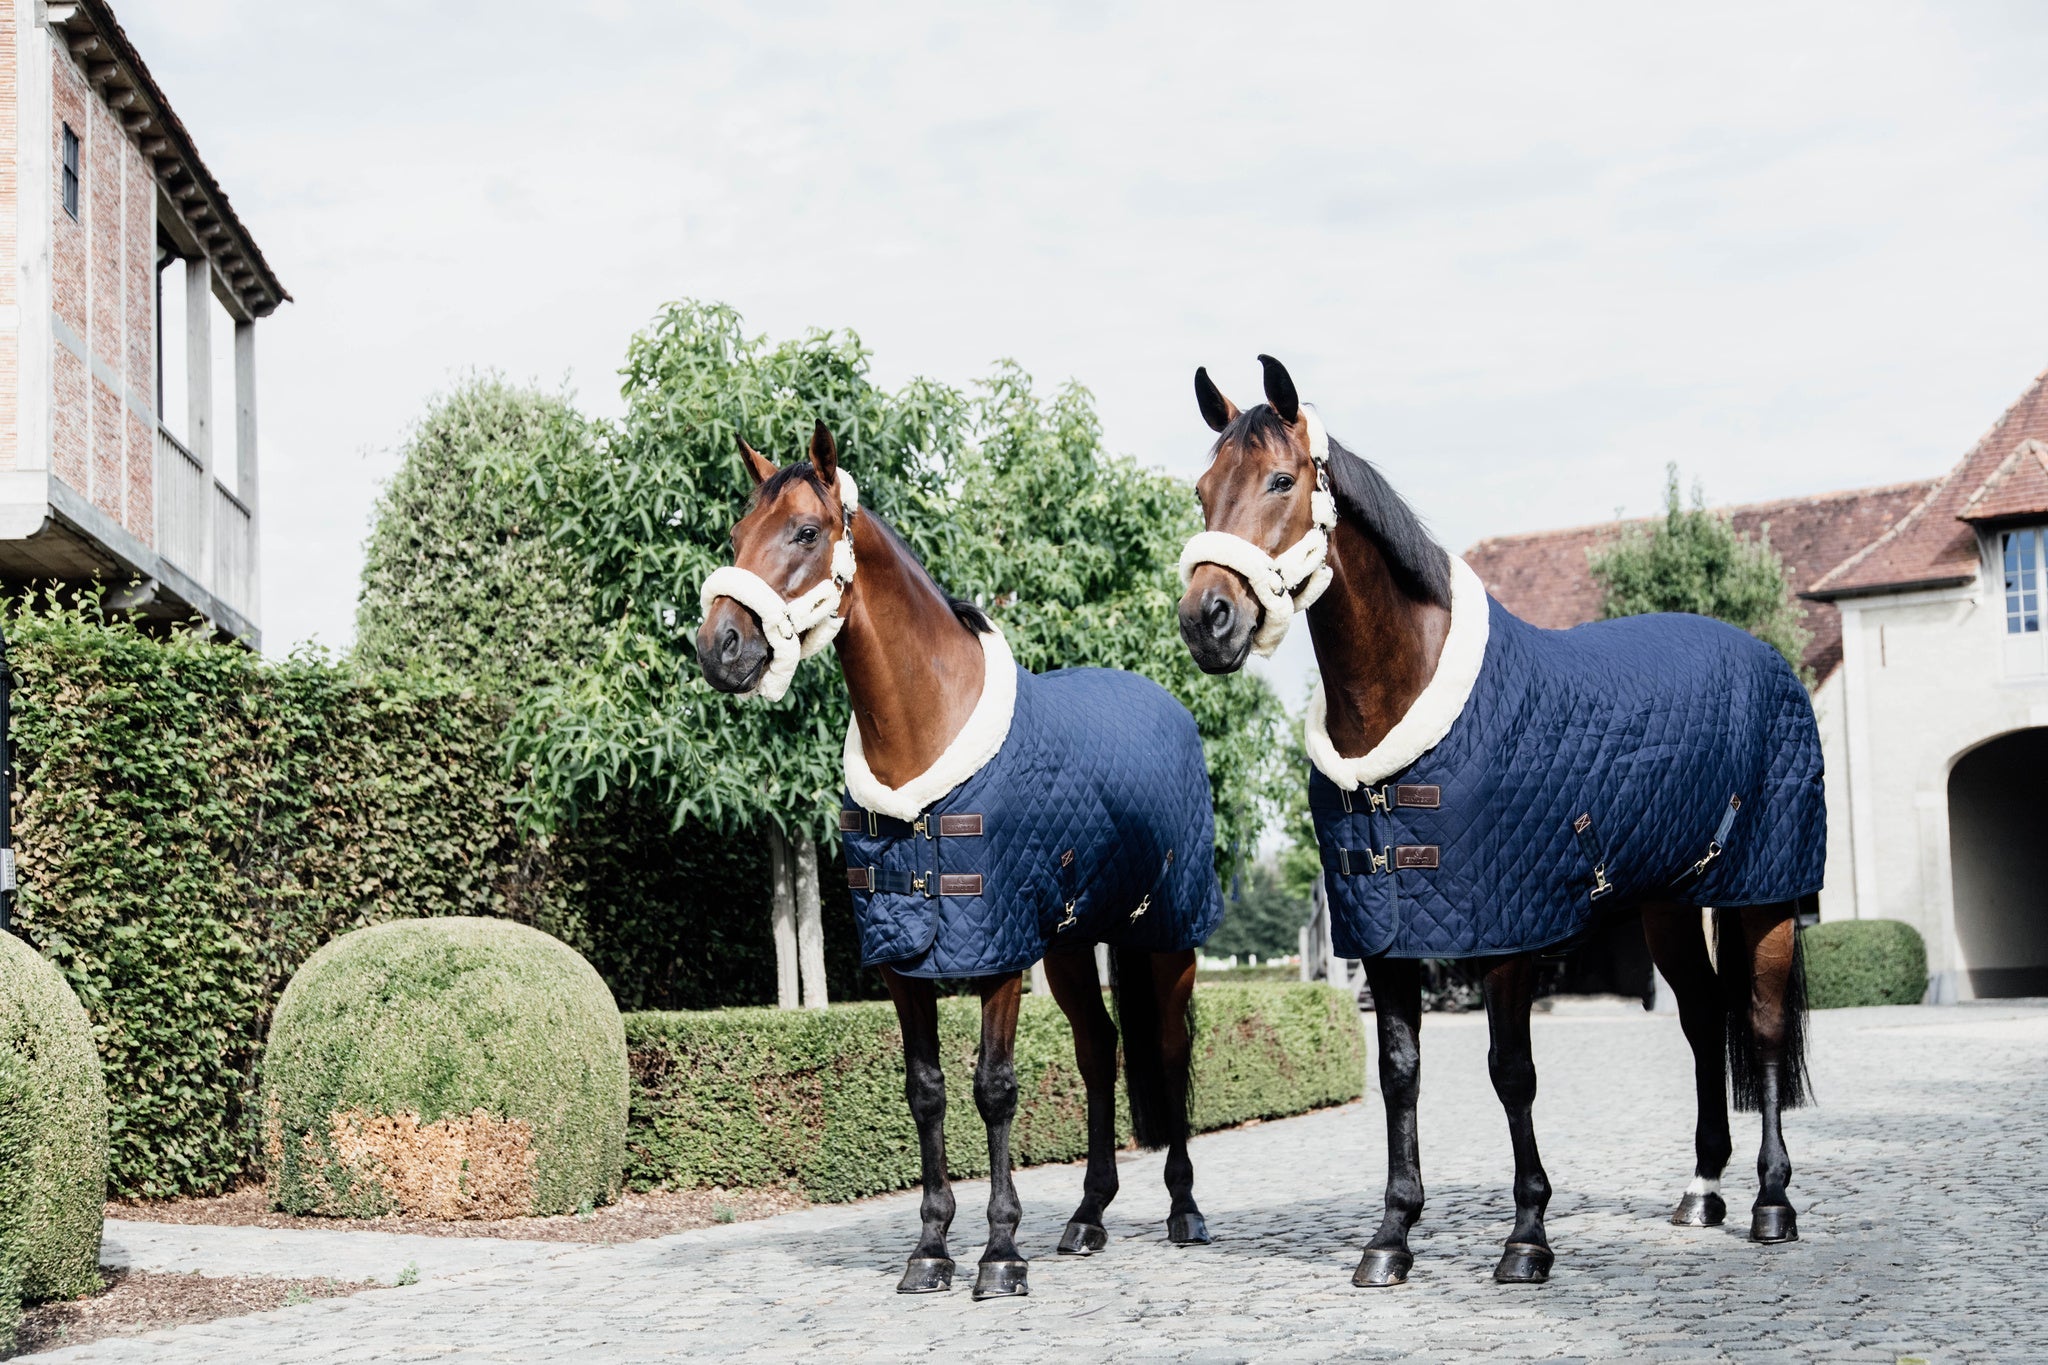 These include Kentucky horsewear including saddle pads, jumping boots, rugs, head collars & grooming. Also saddle pads from Cavalleria Toscana & Equiline. We also stock Equiline bridles, leatherwork and Samshield stirrups. 